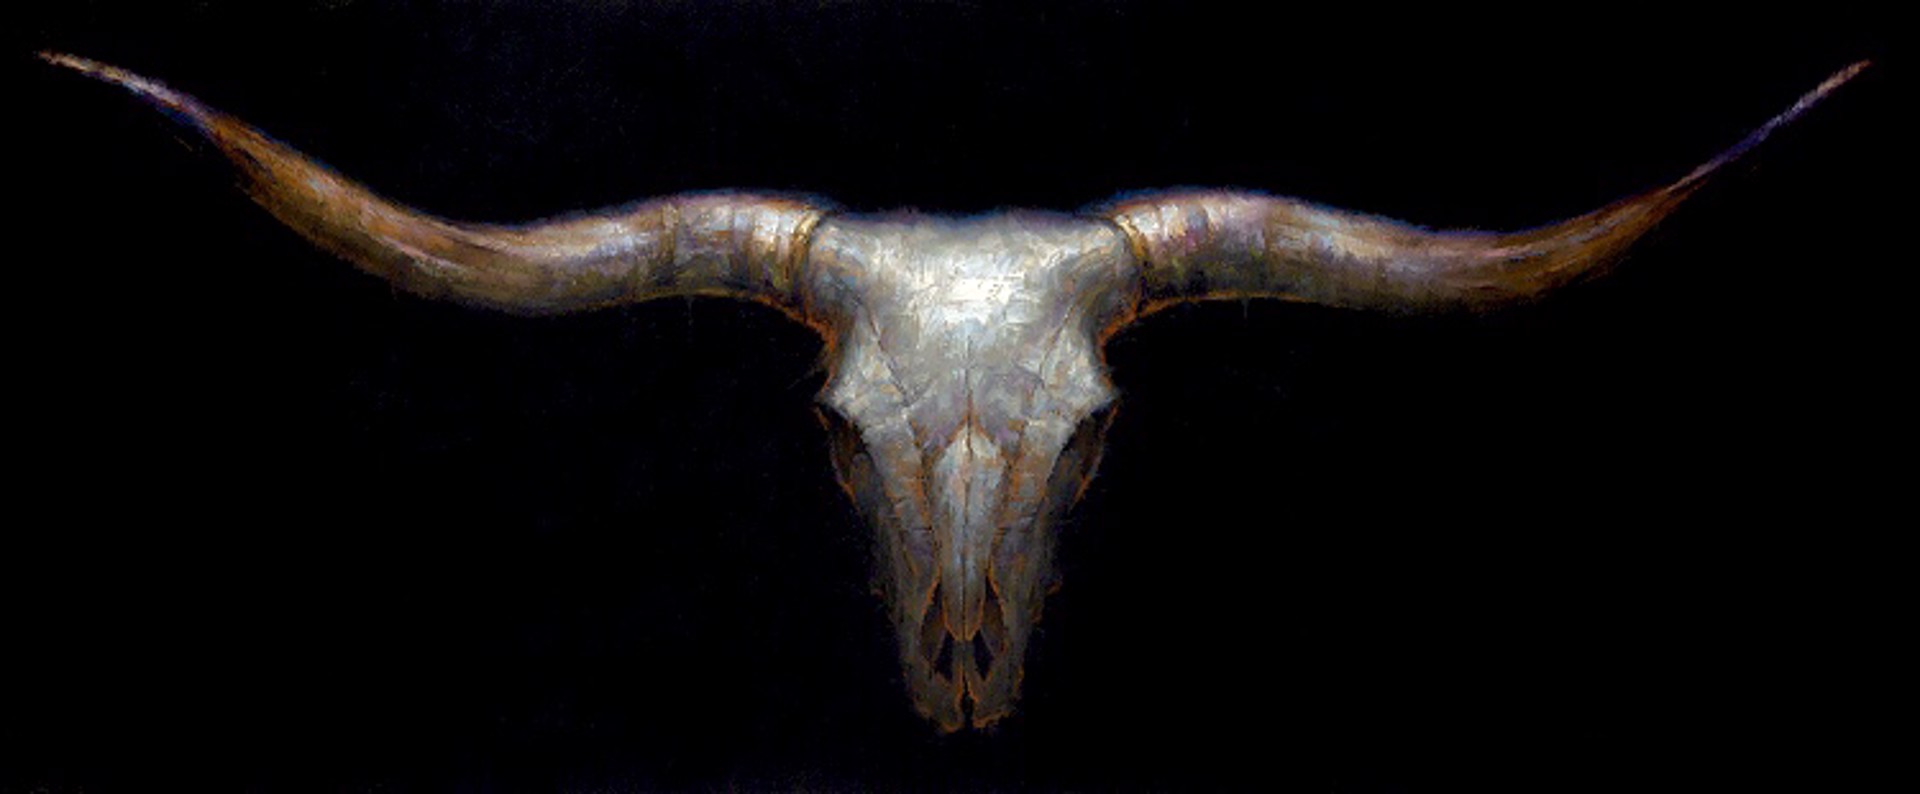 Texas Longhorn by Todd A. Williams